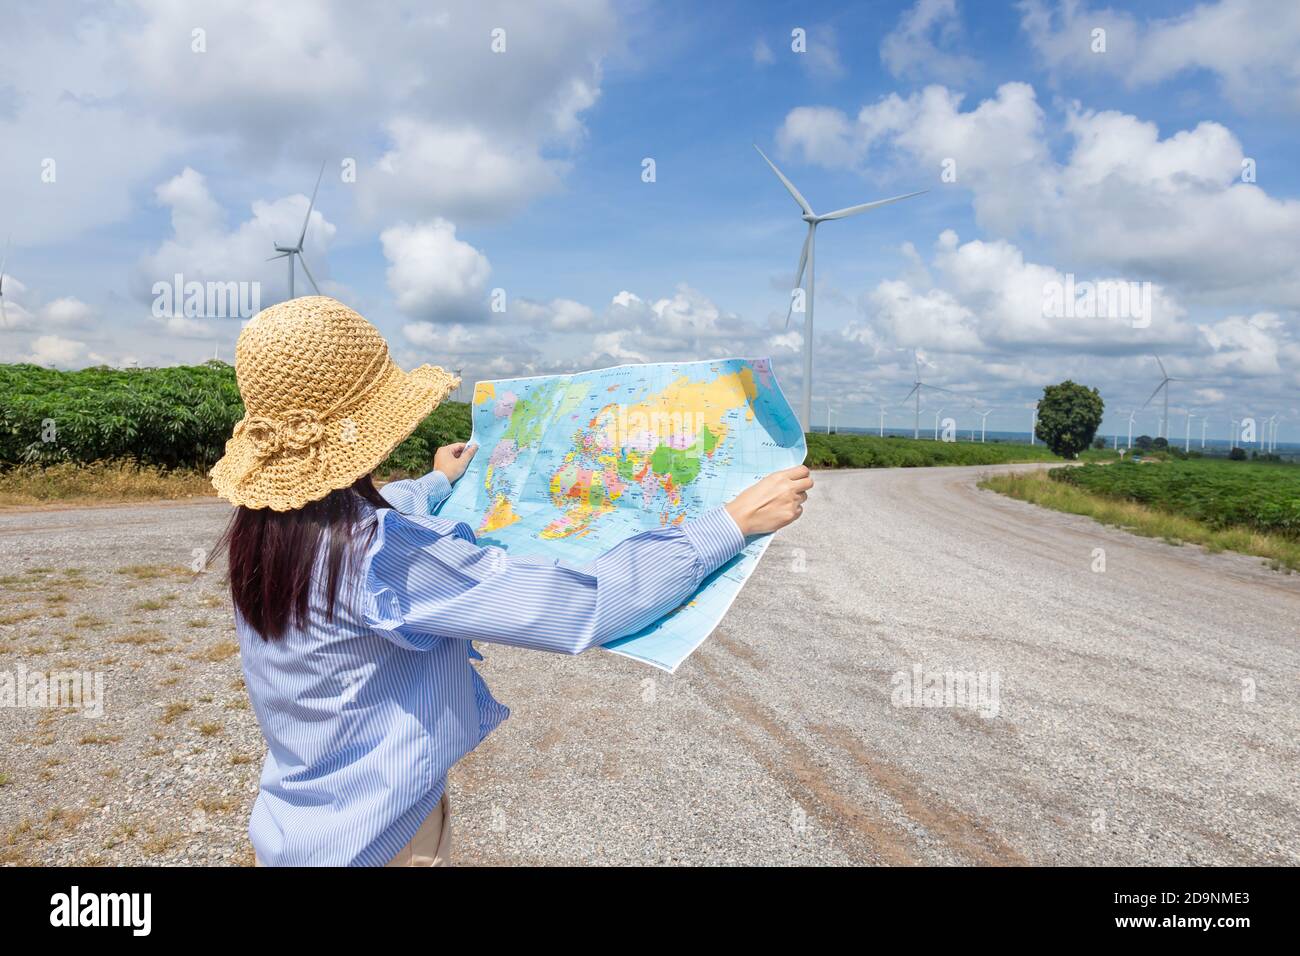 Woman stands looking at an outdoor map to travel to one of the holiday destinations. Stock Photo